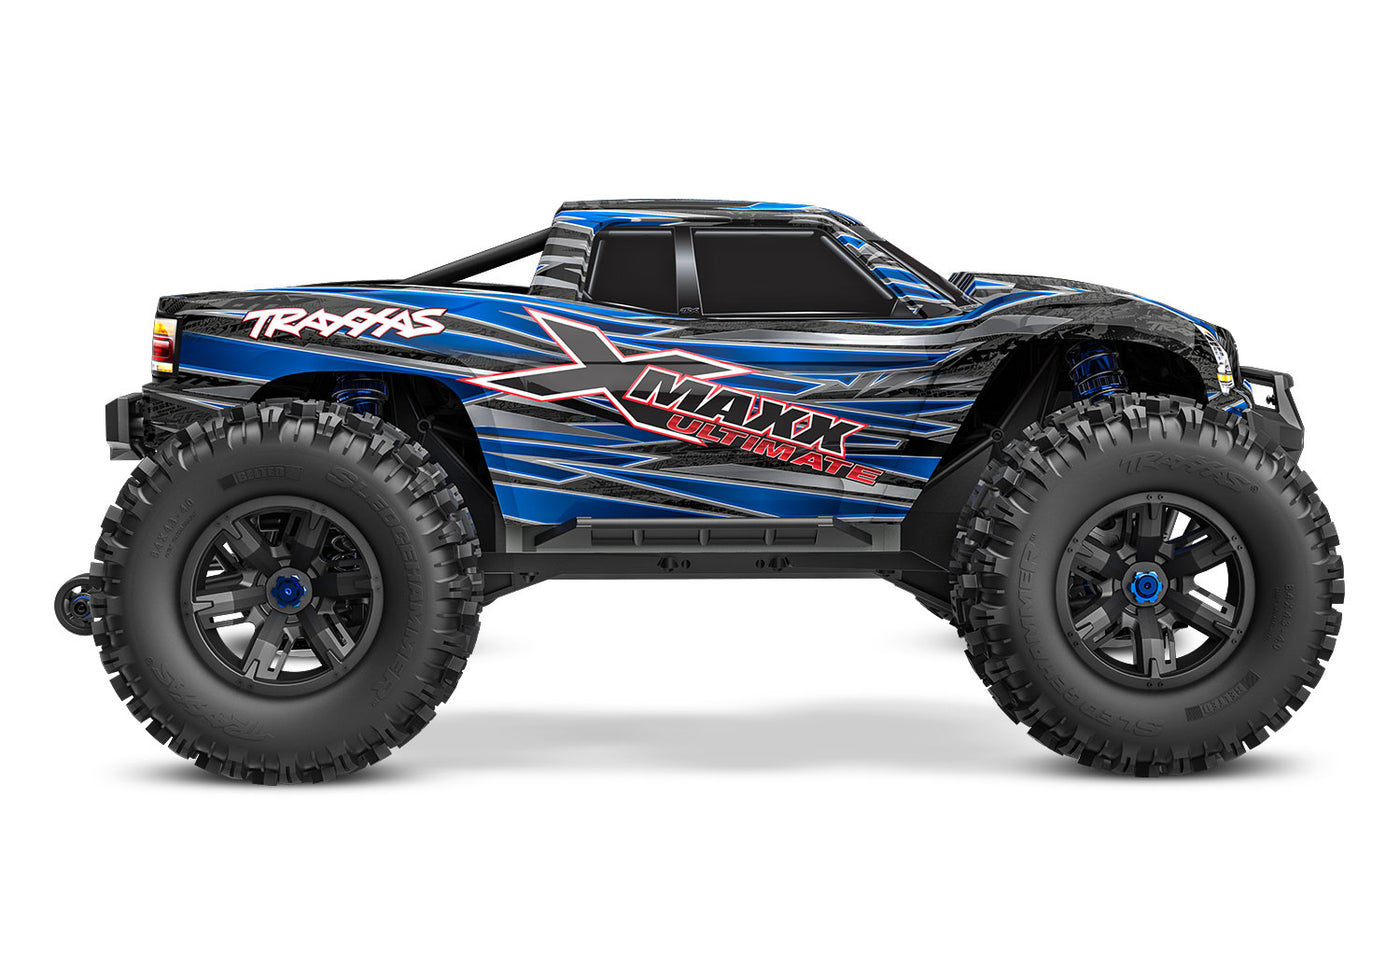 X-Maxx Ultimate: 4WD Monster Truck Traxxas #77097-4